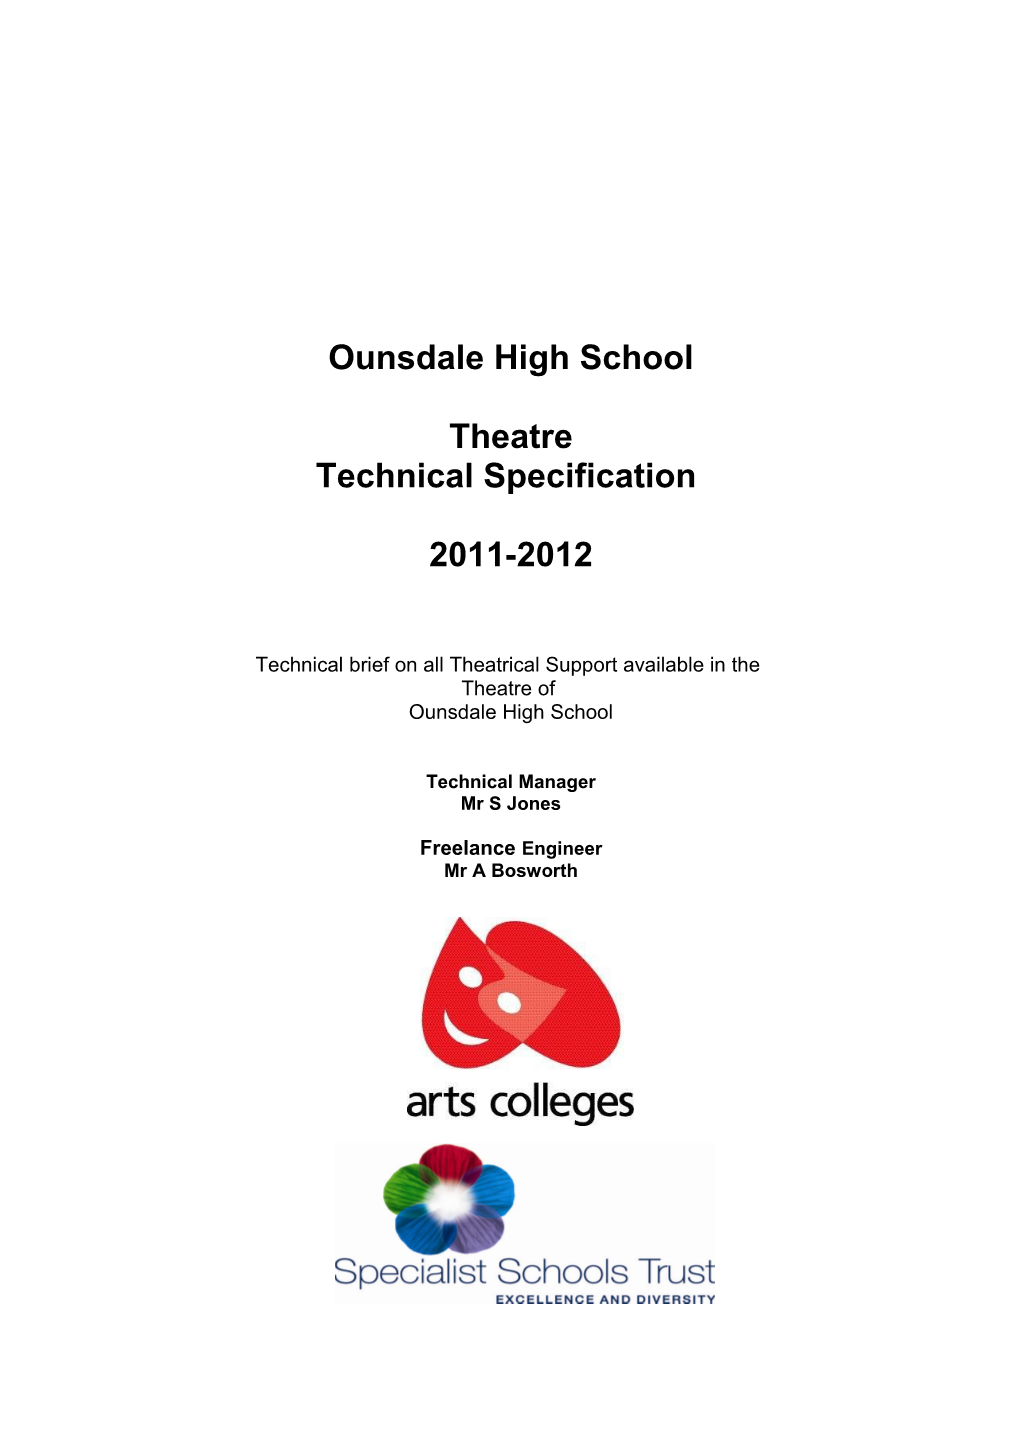 Ounsdale High School Theatre Technical Specification